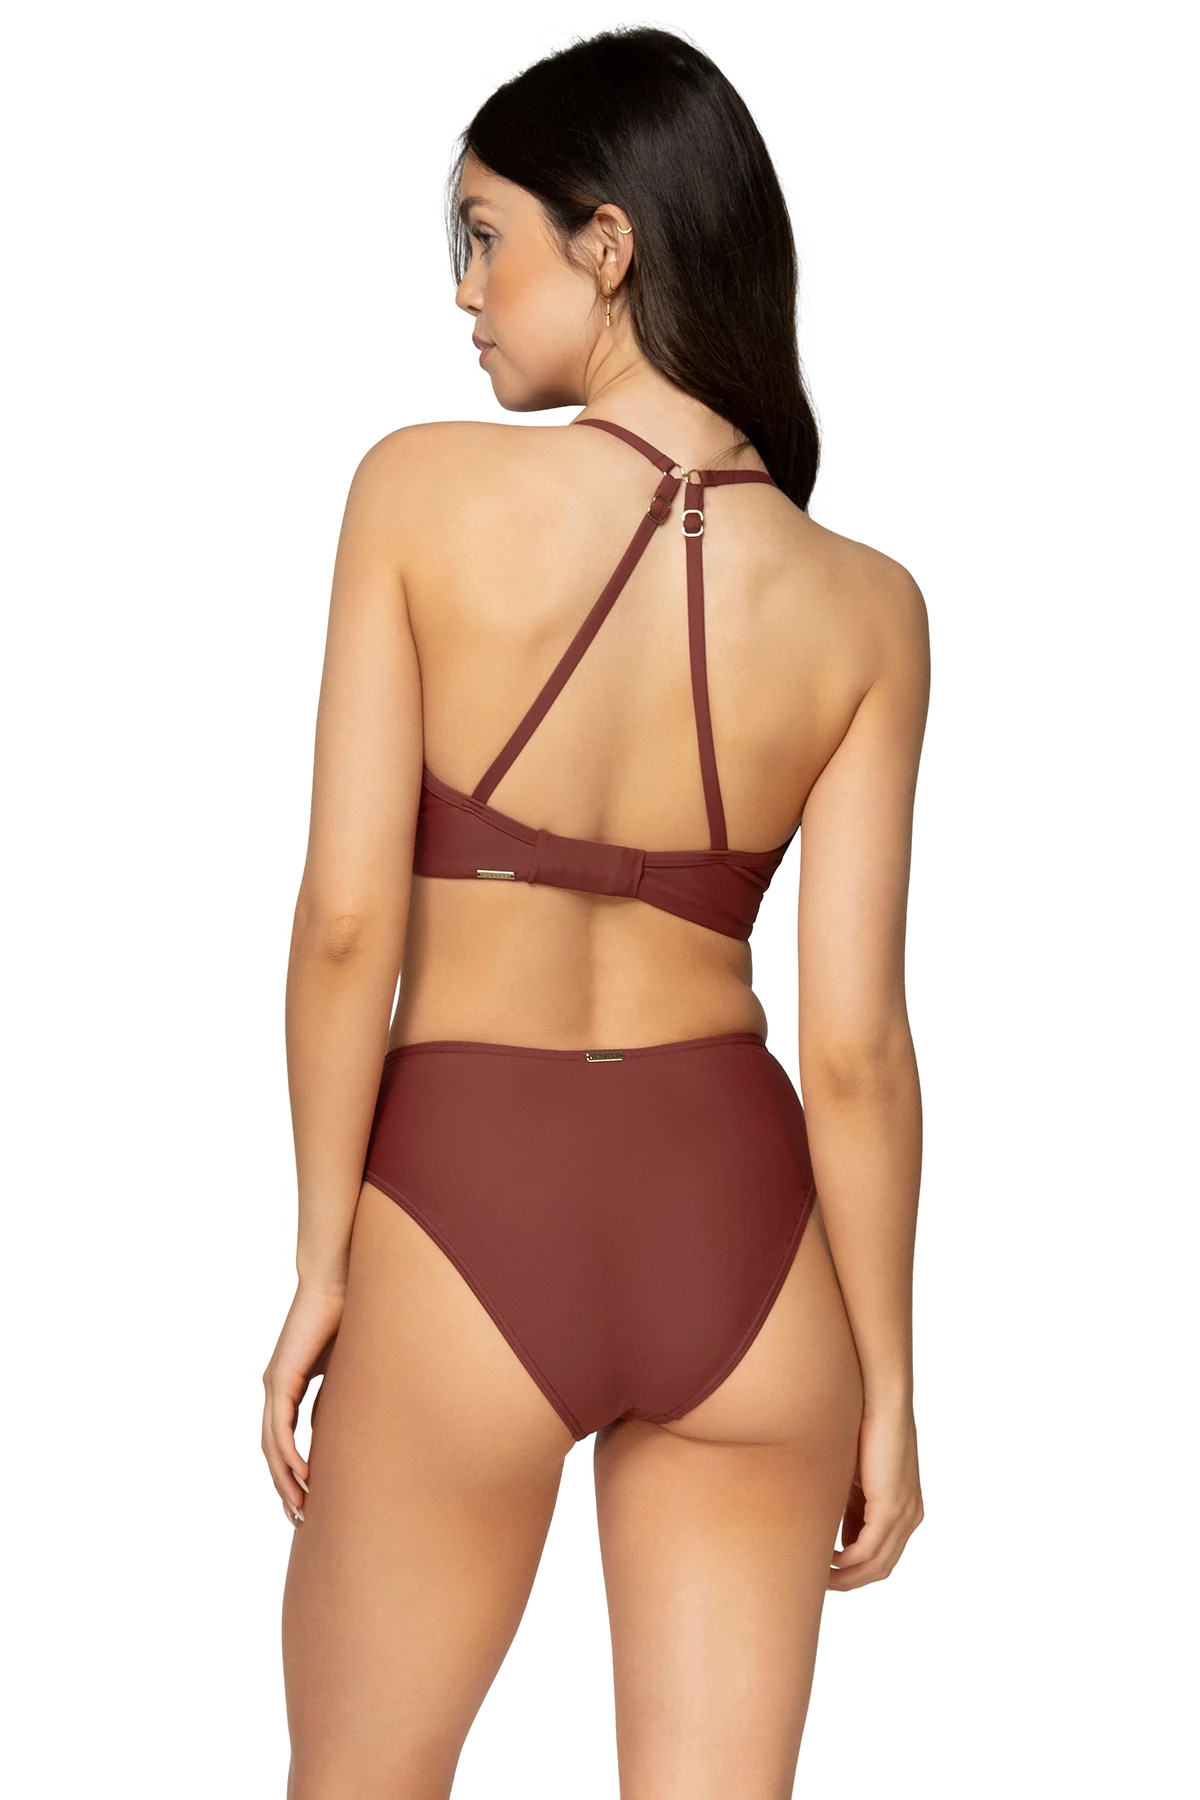 TUSCAN RED Crossroads Underwire Bikini Top (E-H Cup) image number 2